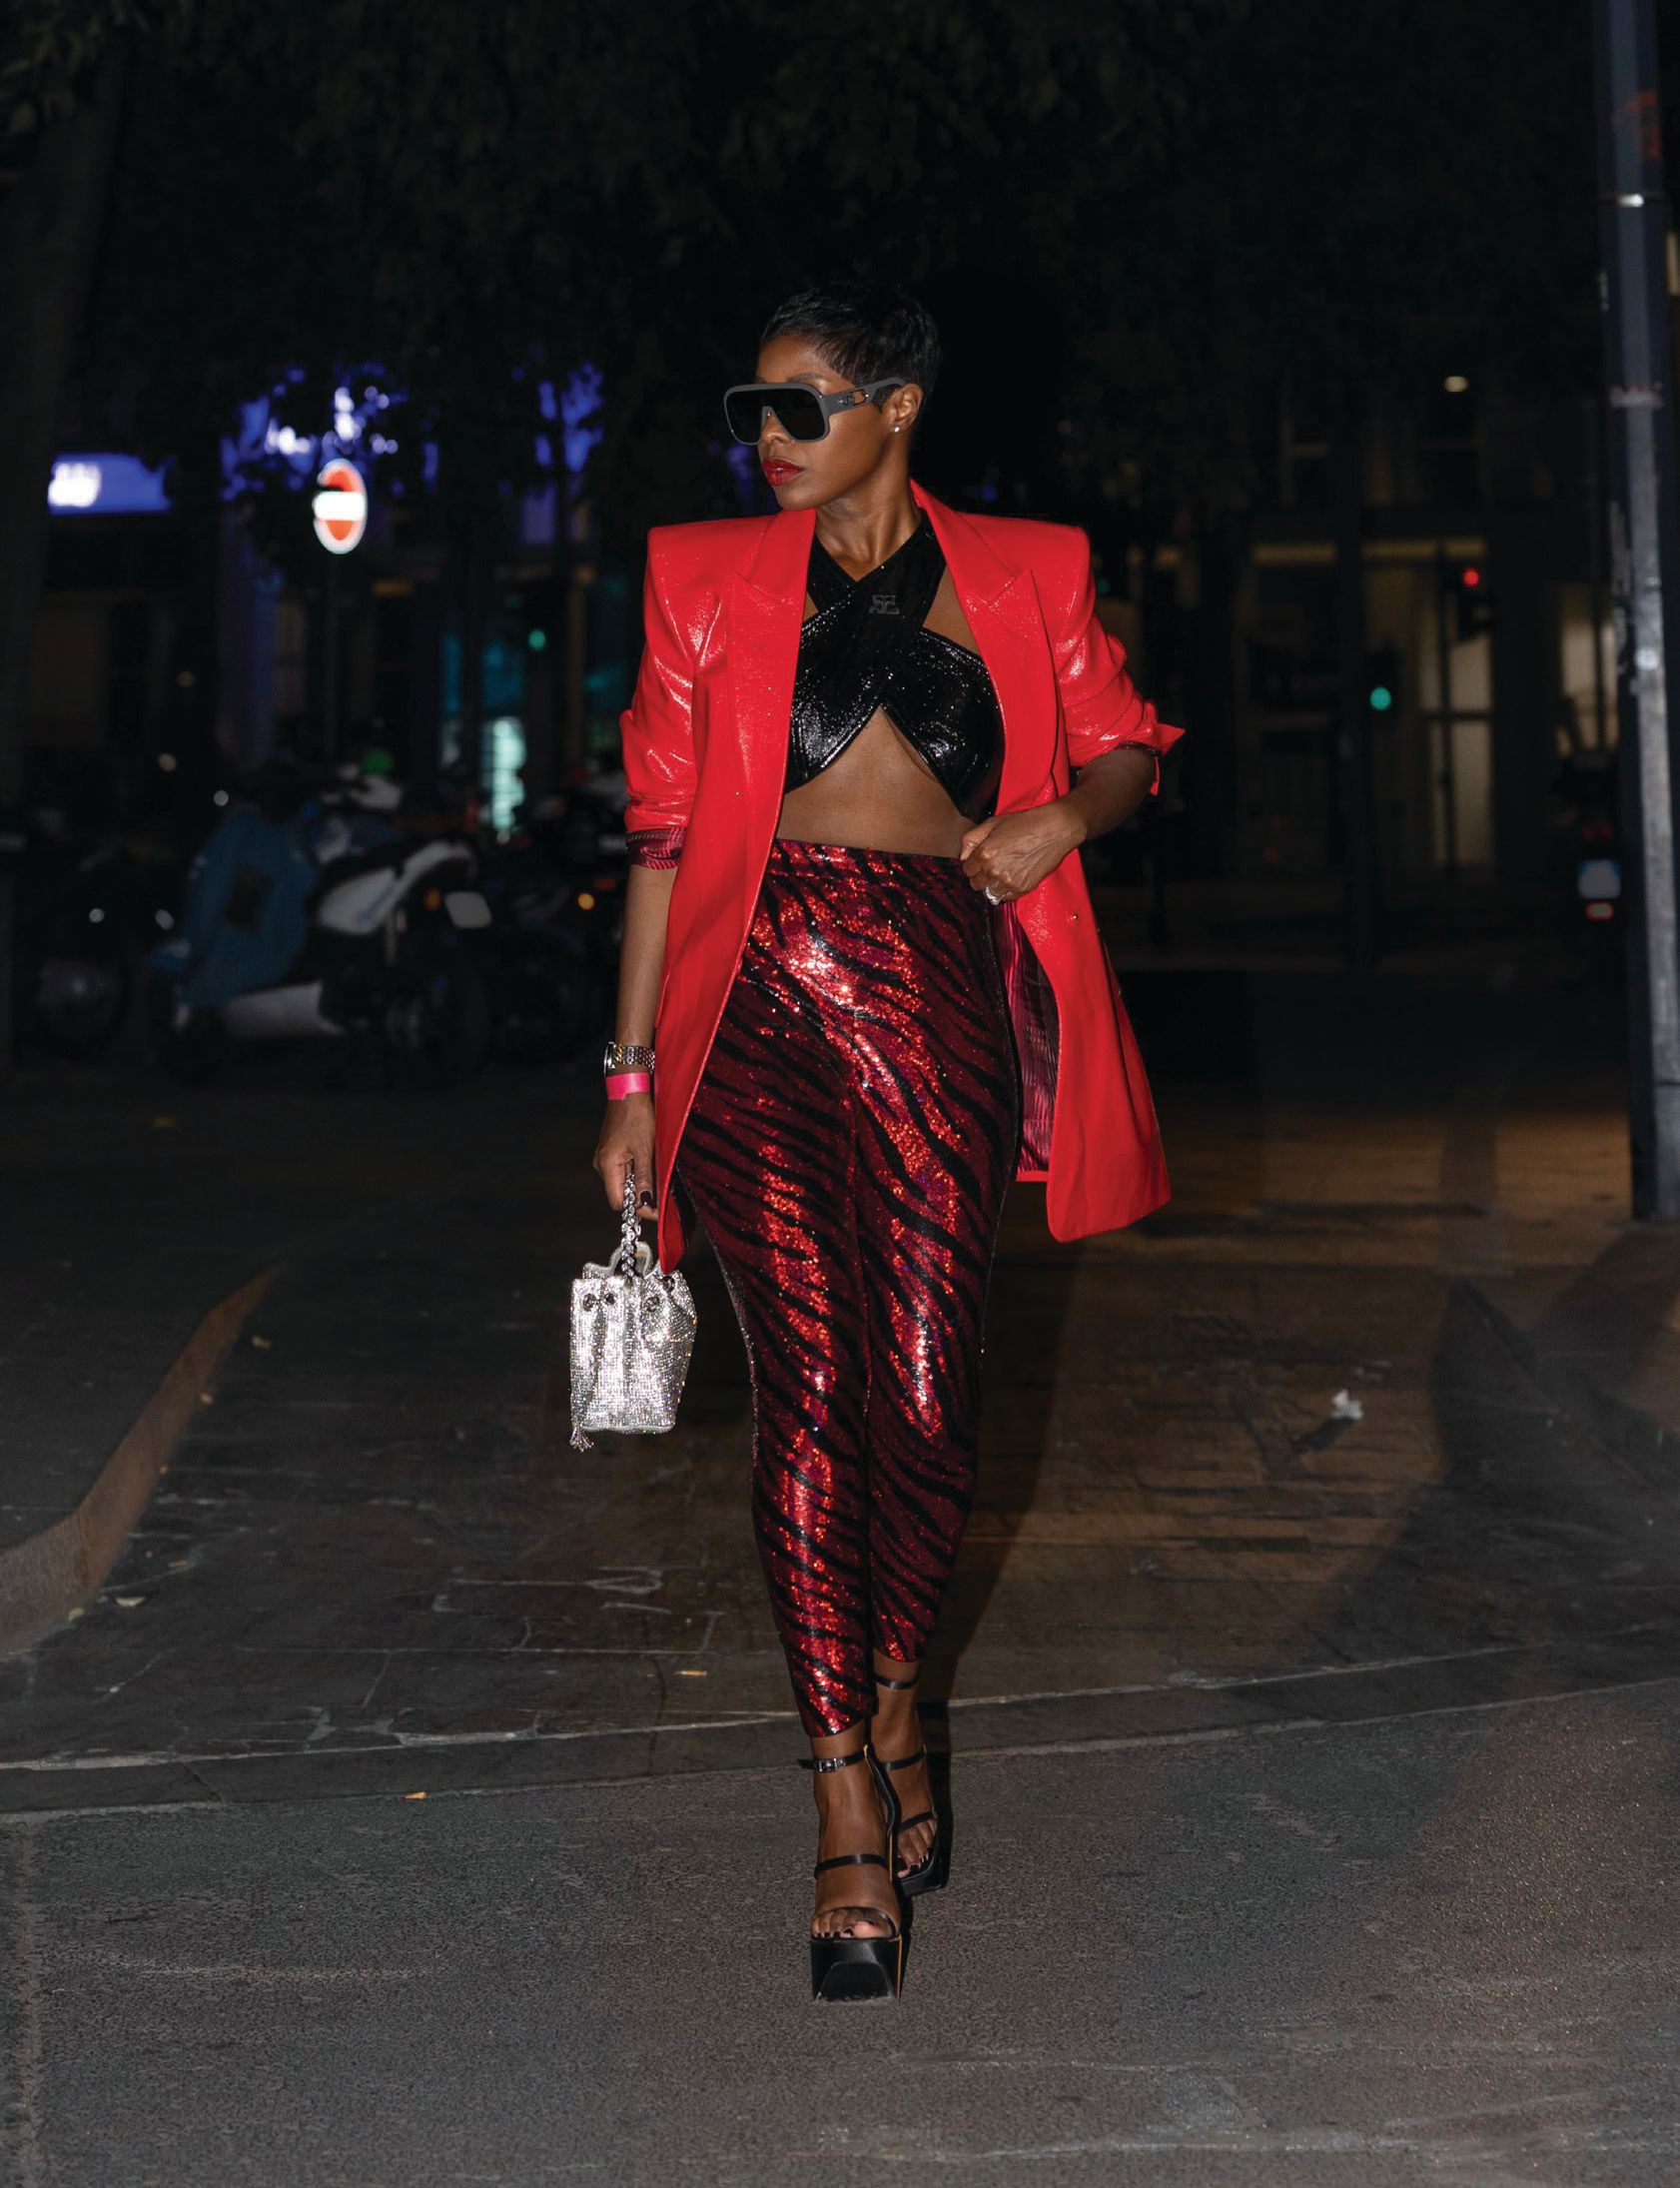 Jenee Naylor heading to the Philipp Plein spring/ summer 2023 runway show during Paris Fashion Week September 2022 Photographed by Josh Prieto